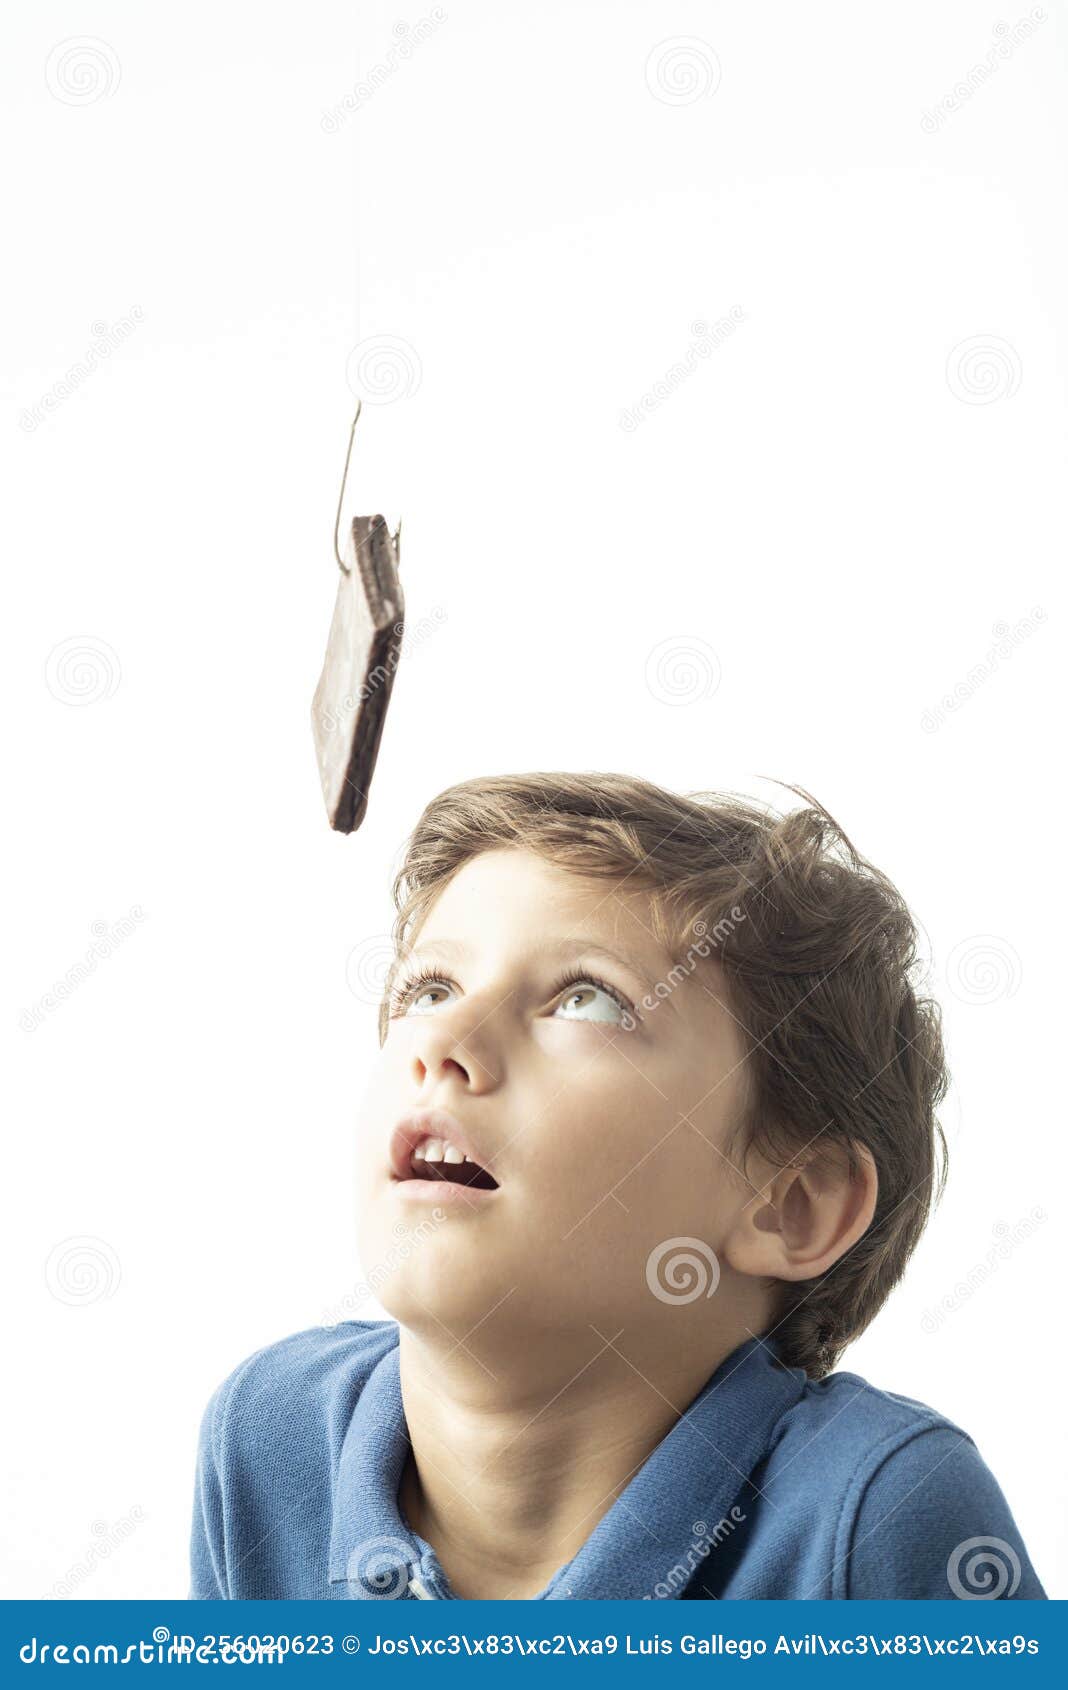 a child looks longingly at a sponge cake hanging from a hook